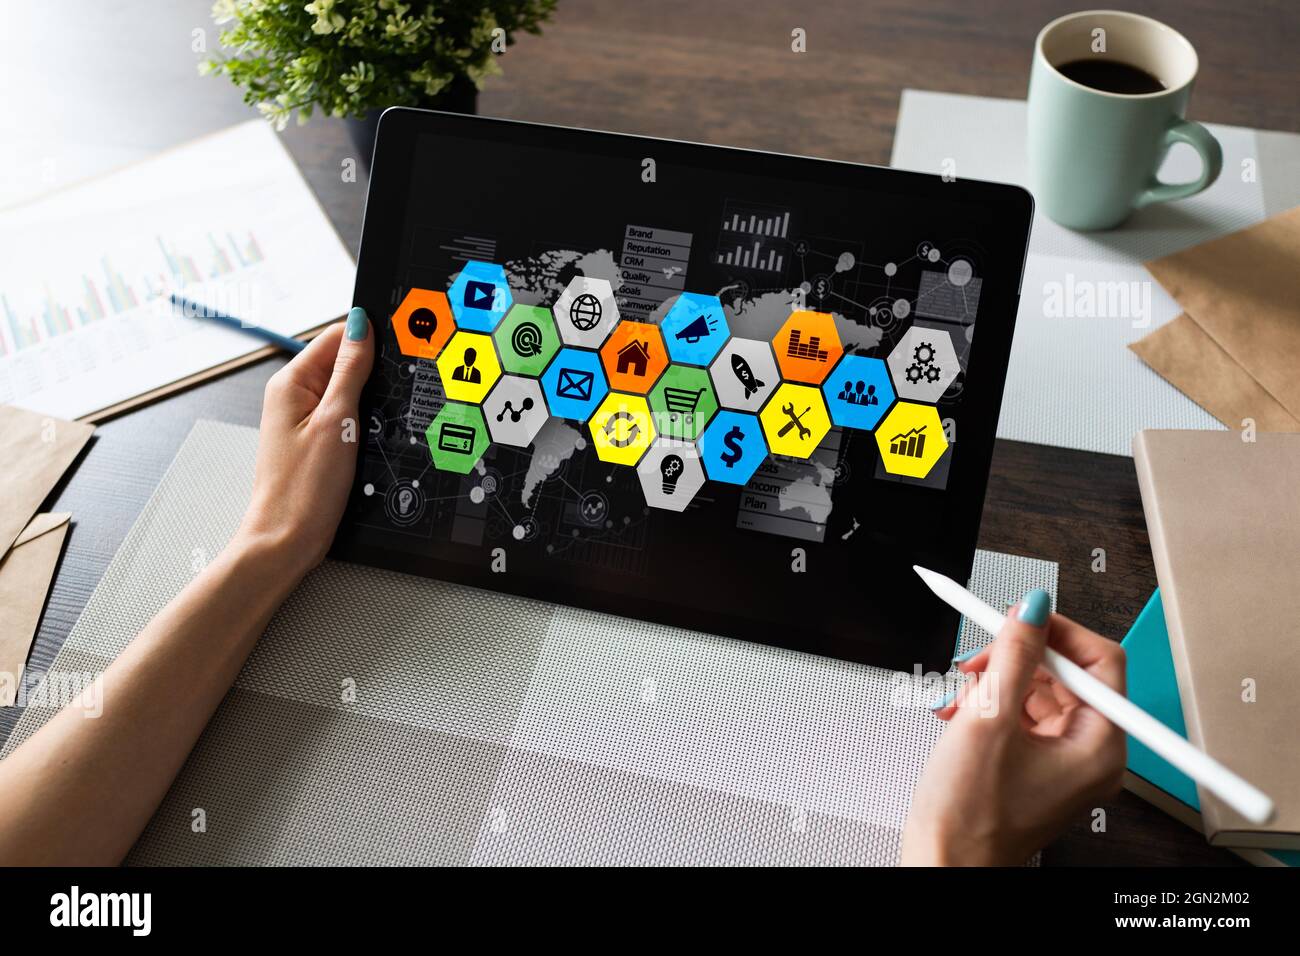 Application and diagrams on device screen. Business control panel and apps development concept Stock Photo